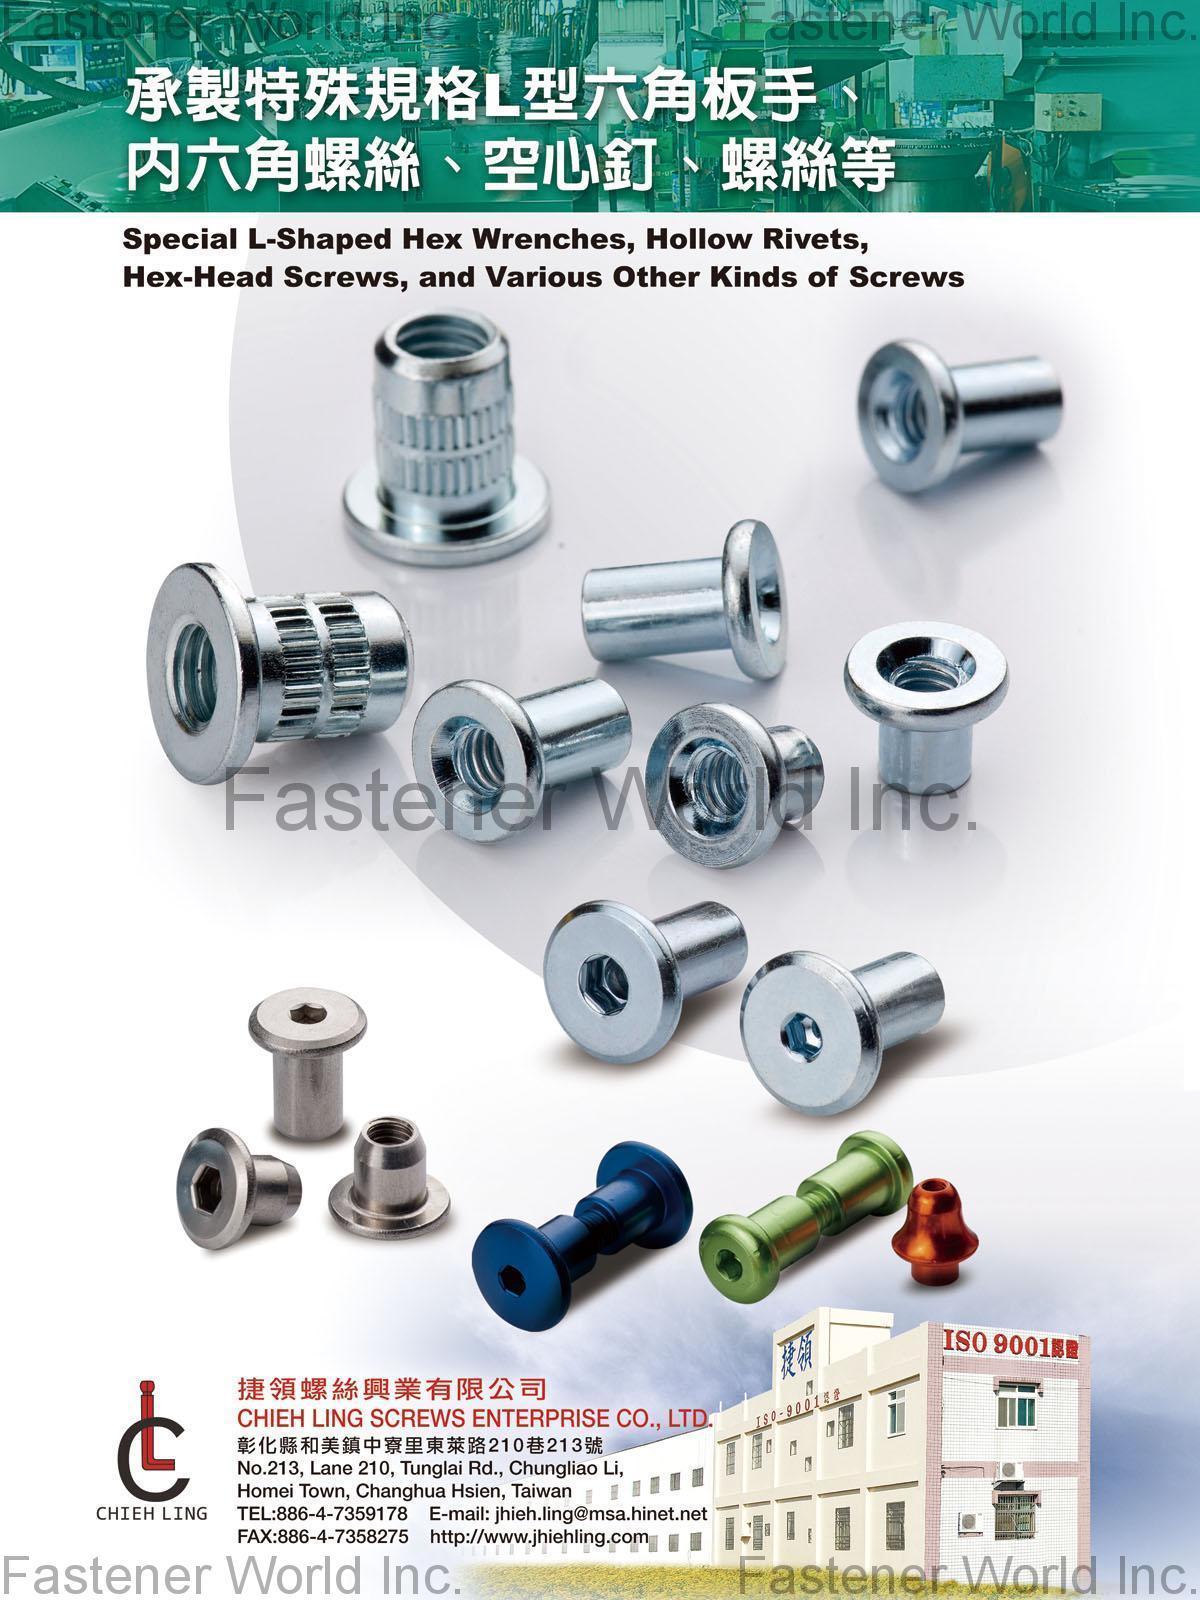 CHIEH LING SCREWS ENTERPRISE CO., LTD. , Special L-Shaped Hex Wrenches, Hollow Rivets, Hex-Head Screws, Various Other Kinds of Screws , Hex-key Wrenches